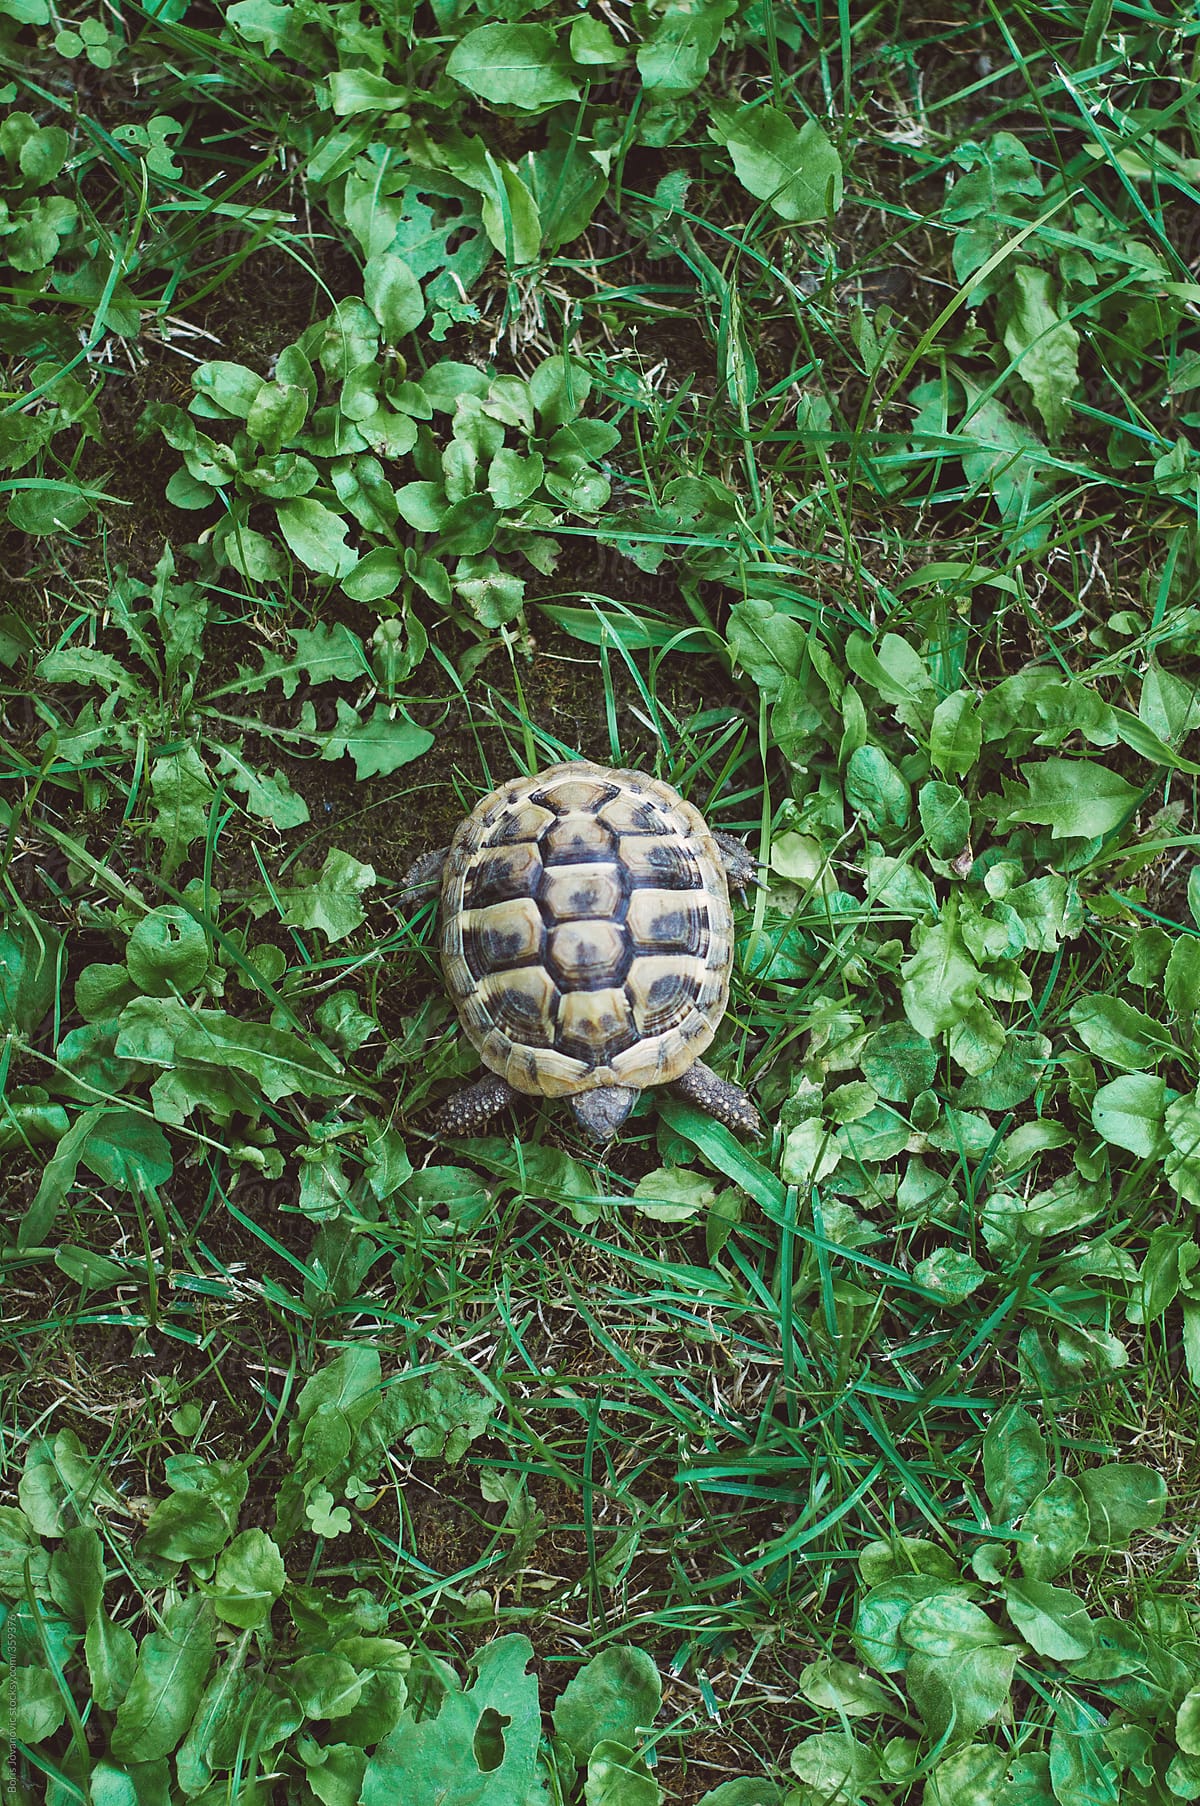 Above shot of small turtle in grass